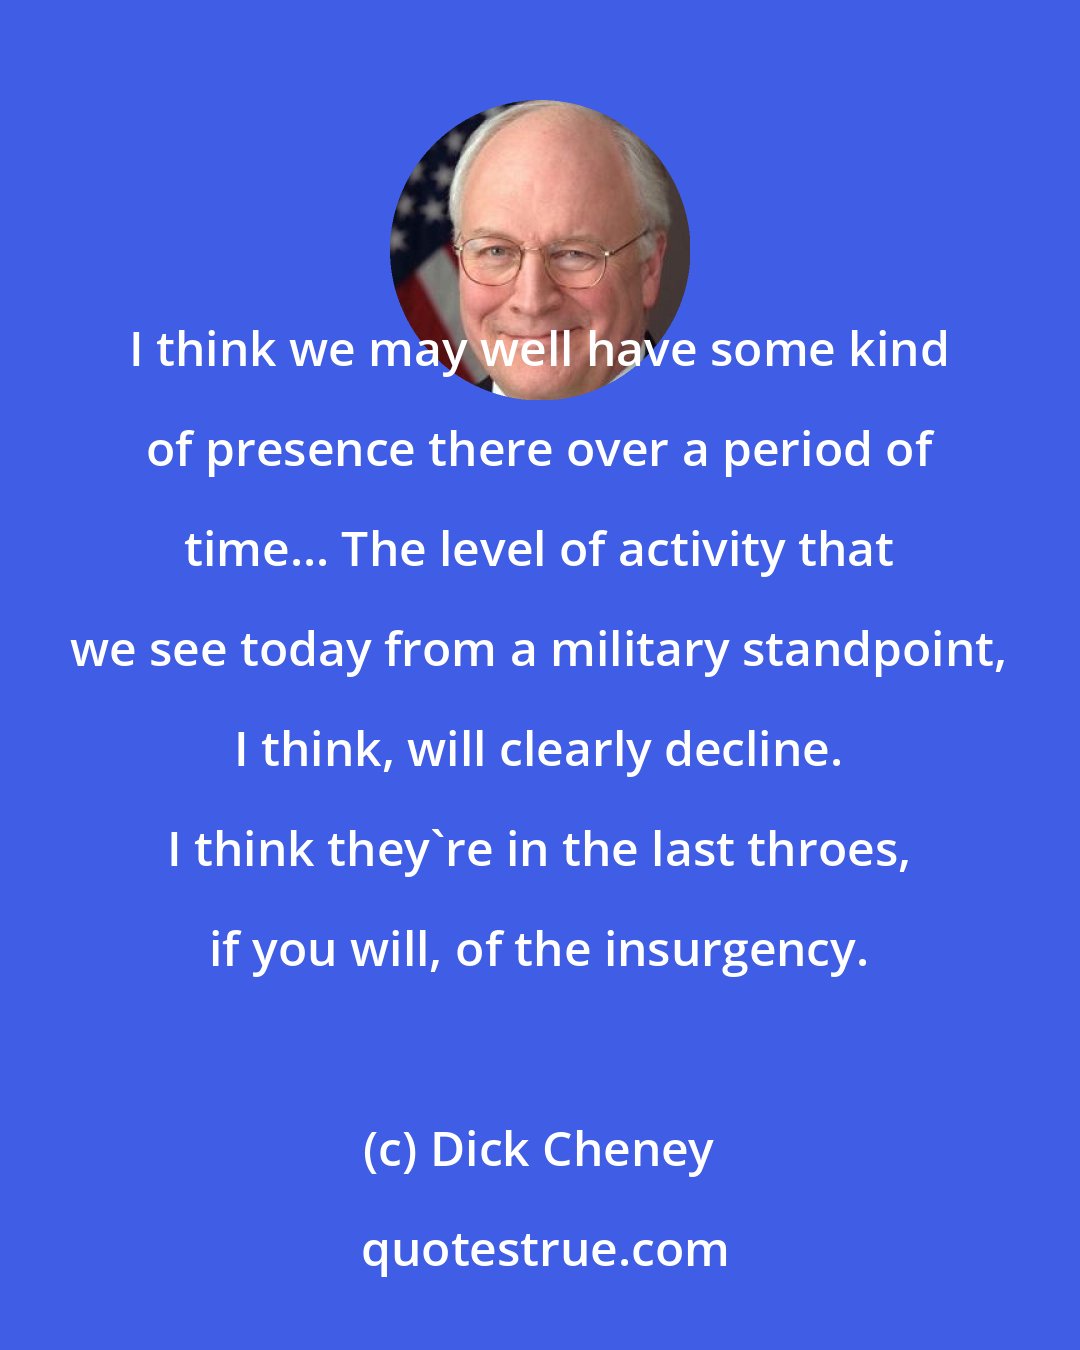 Dick Cheney: I think we may well have some kind of presence there over a period of time... The level of activity that we see today from a military standpoint, I think, will clearly decline. I think they're in the last throes, if you will, of the insurgency.